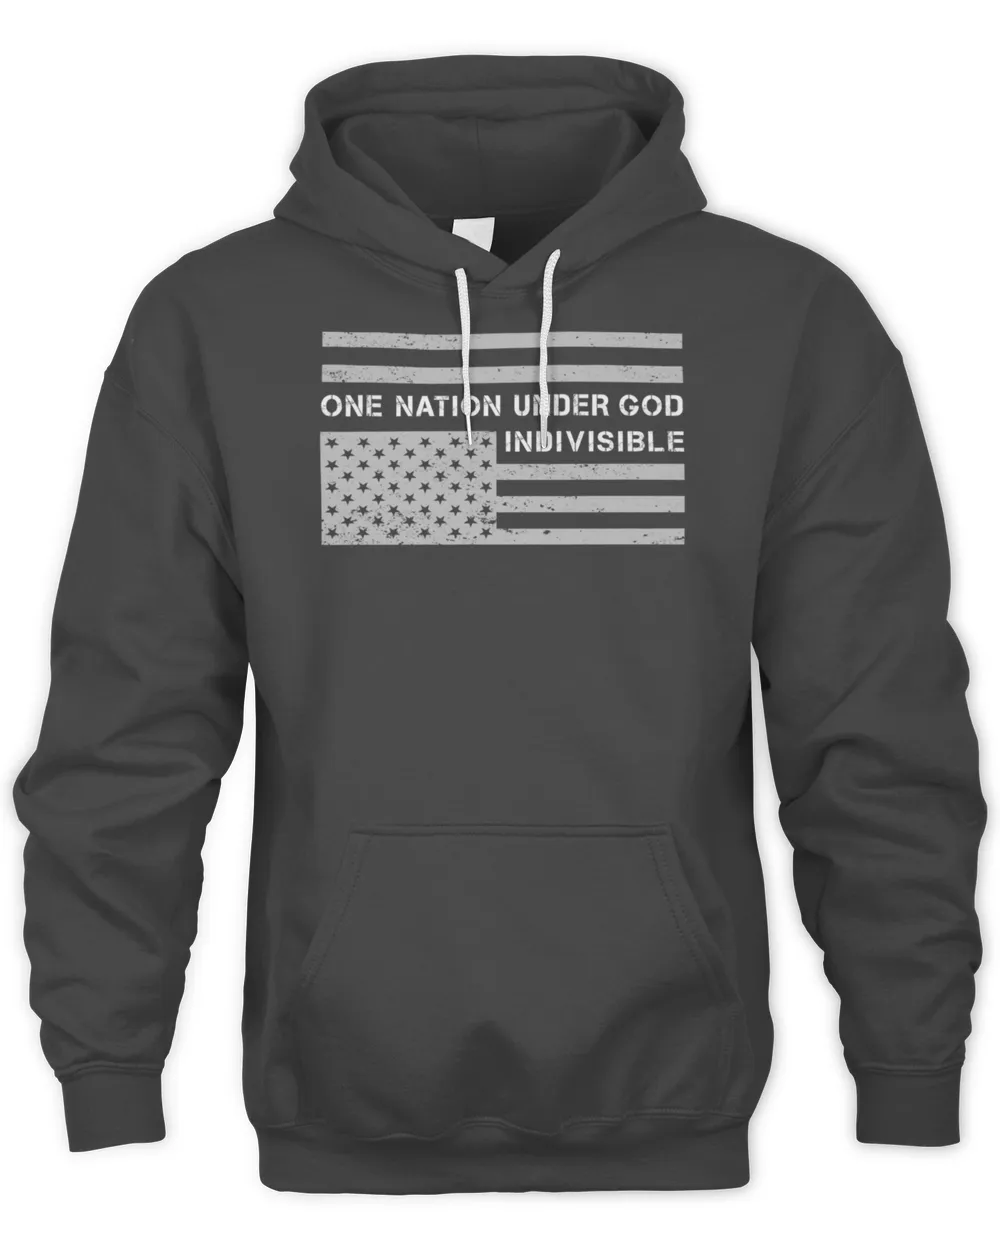 Upside Down US Flag in Distress - America Divided - Pledge of Allegiance Political Statement T-Shirt